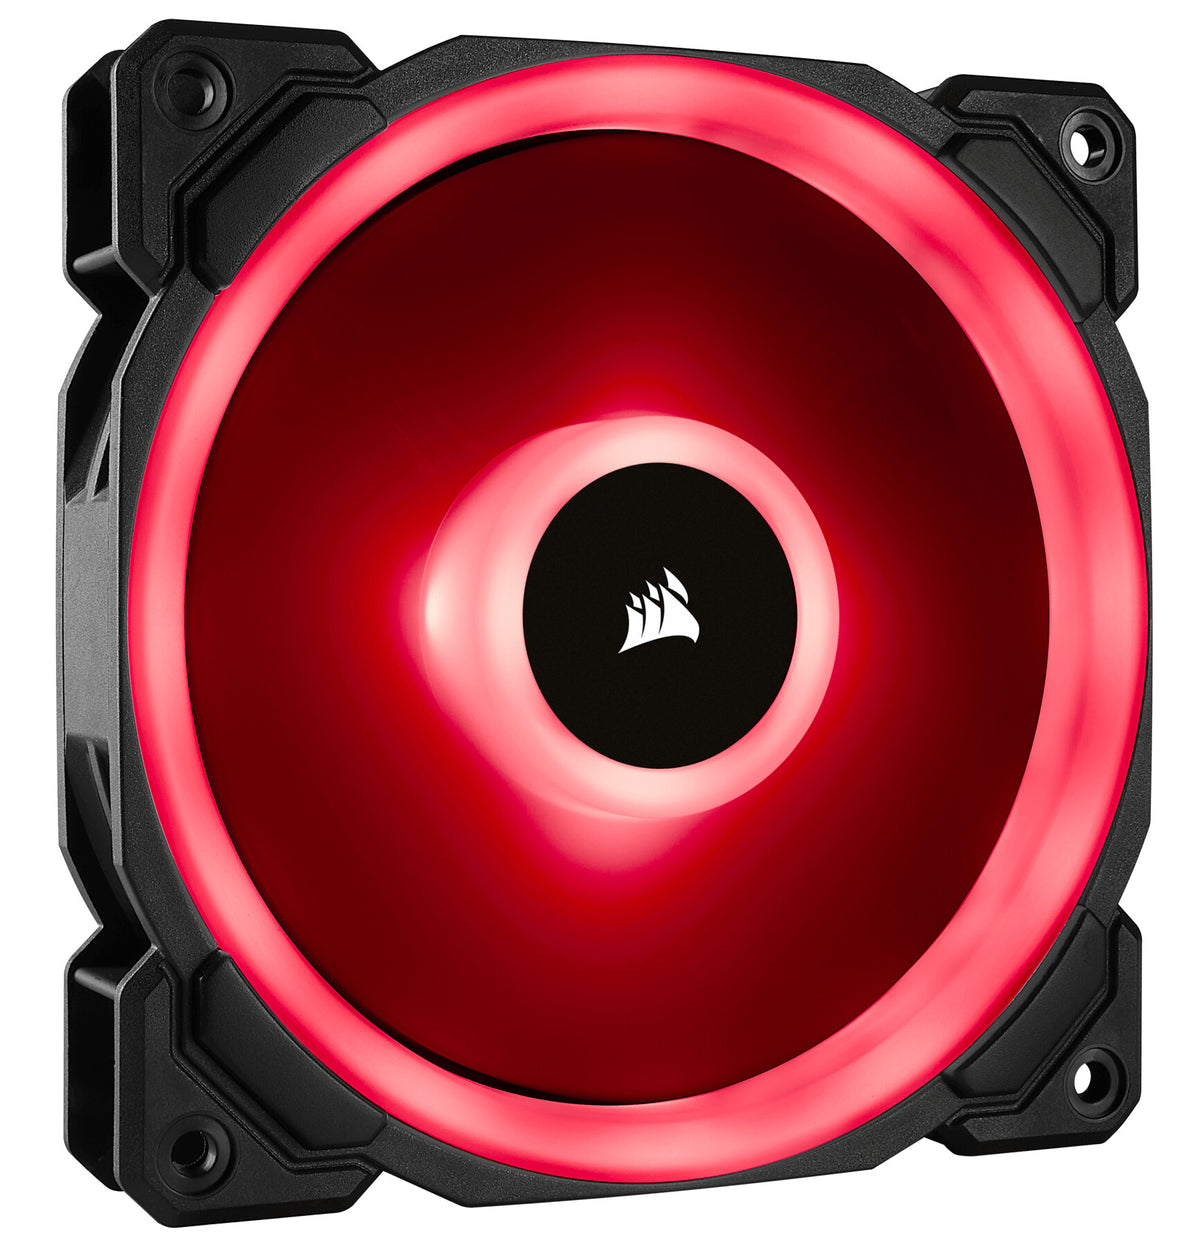 Corsair LL120 RGB - Computer Case Fan in Black / White - 120mm (Pack of 3)